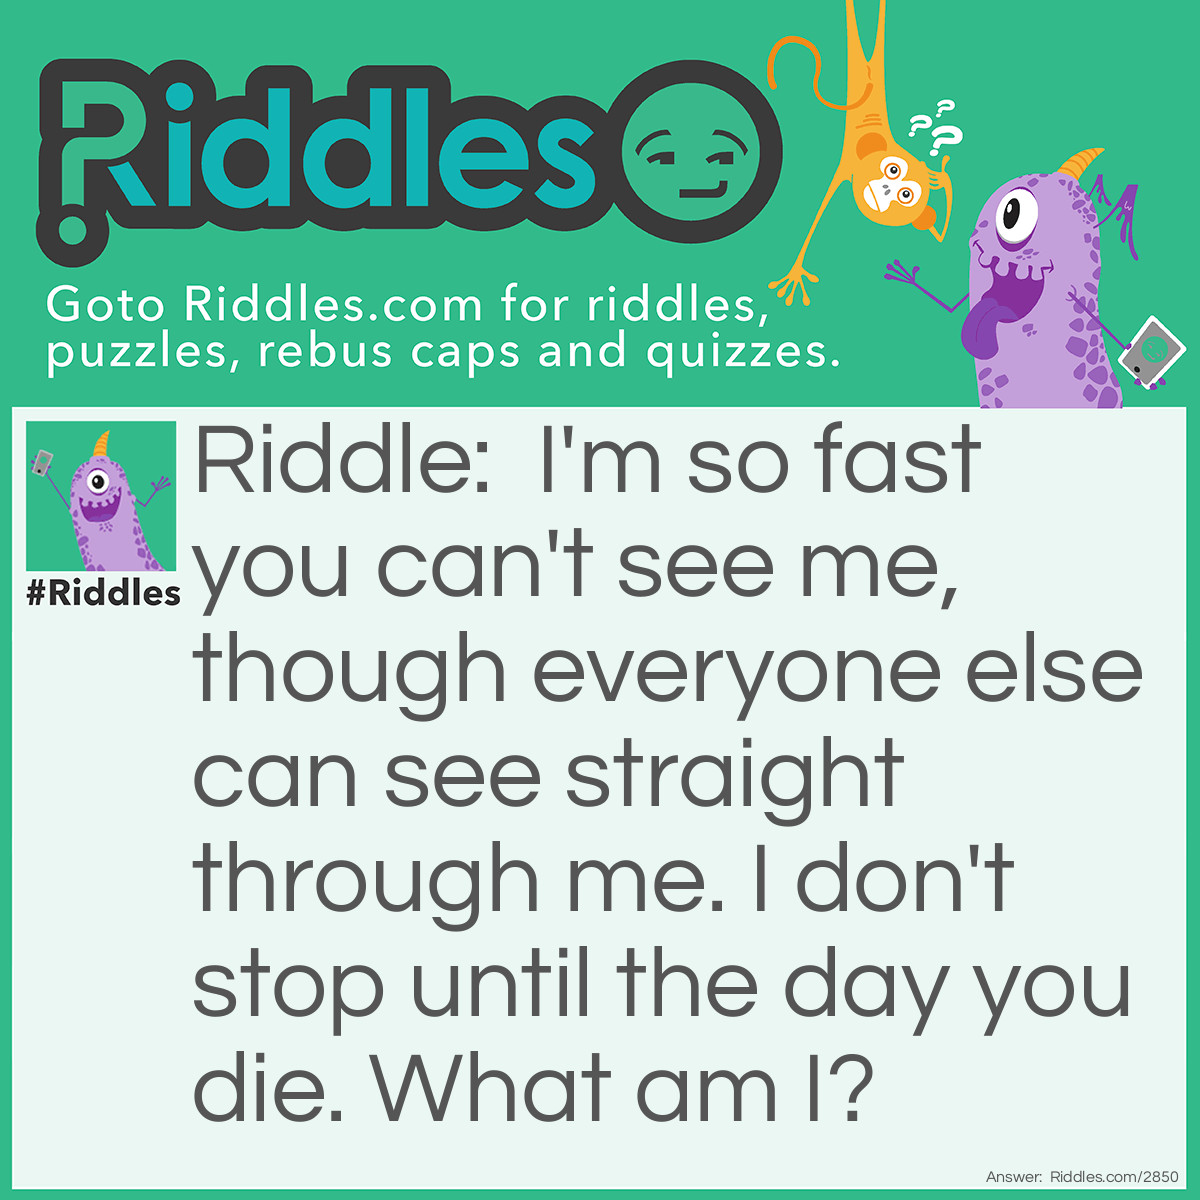 Riddle: I'm so fast you can't see me, though everyone else can see straight through me. I don't stop until the day you die. What am I? Answer: The blink of an eye.